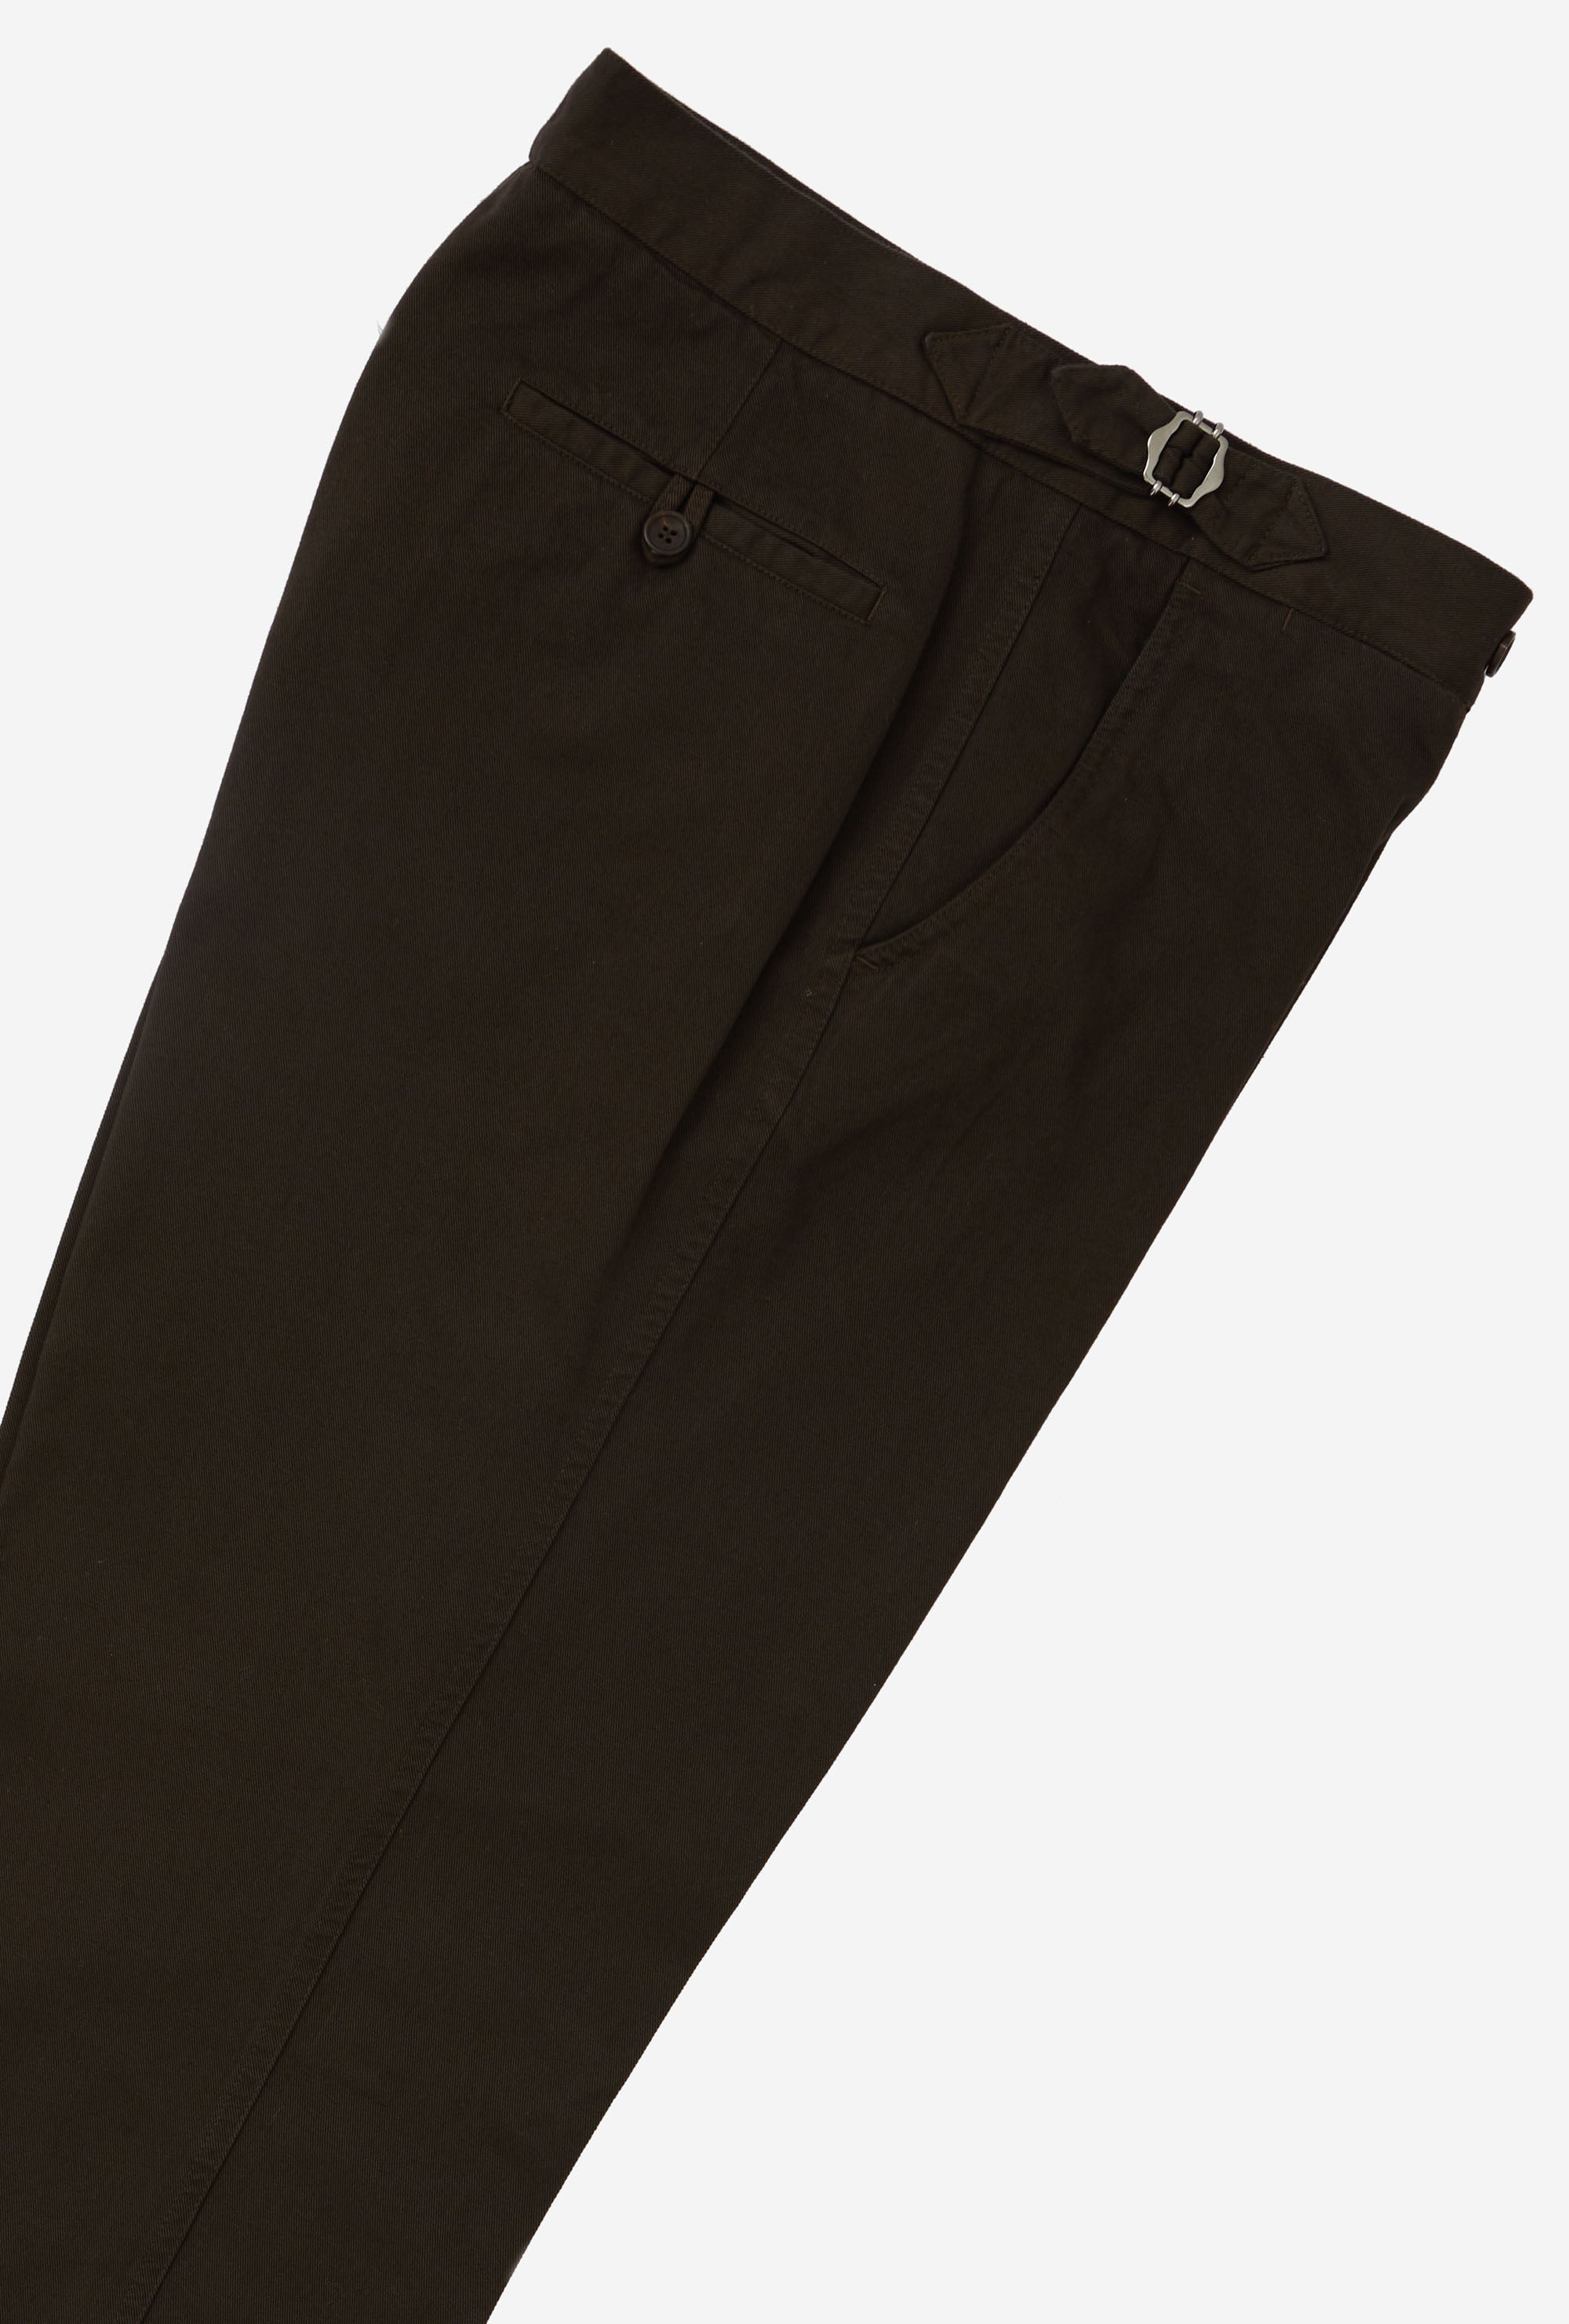 Garment Dyed Flat Front Cotton Trouser Brown